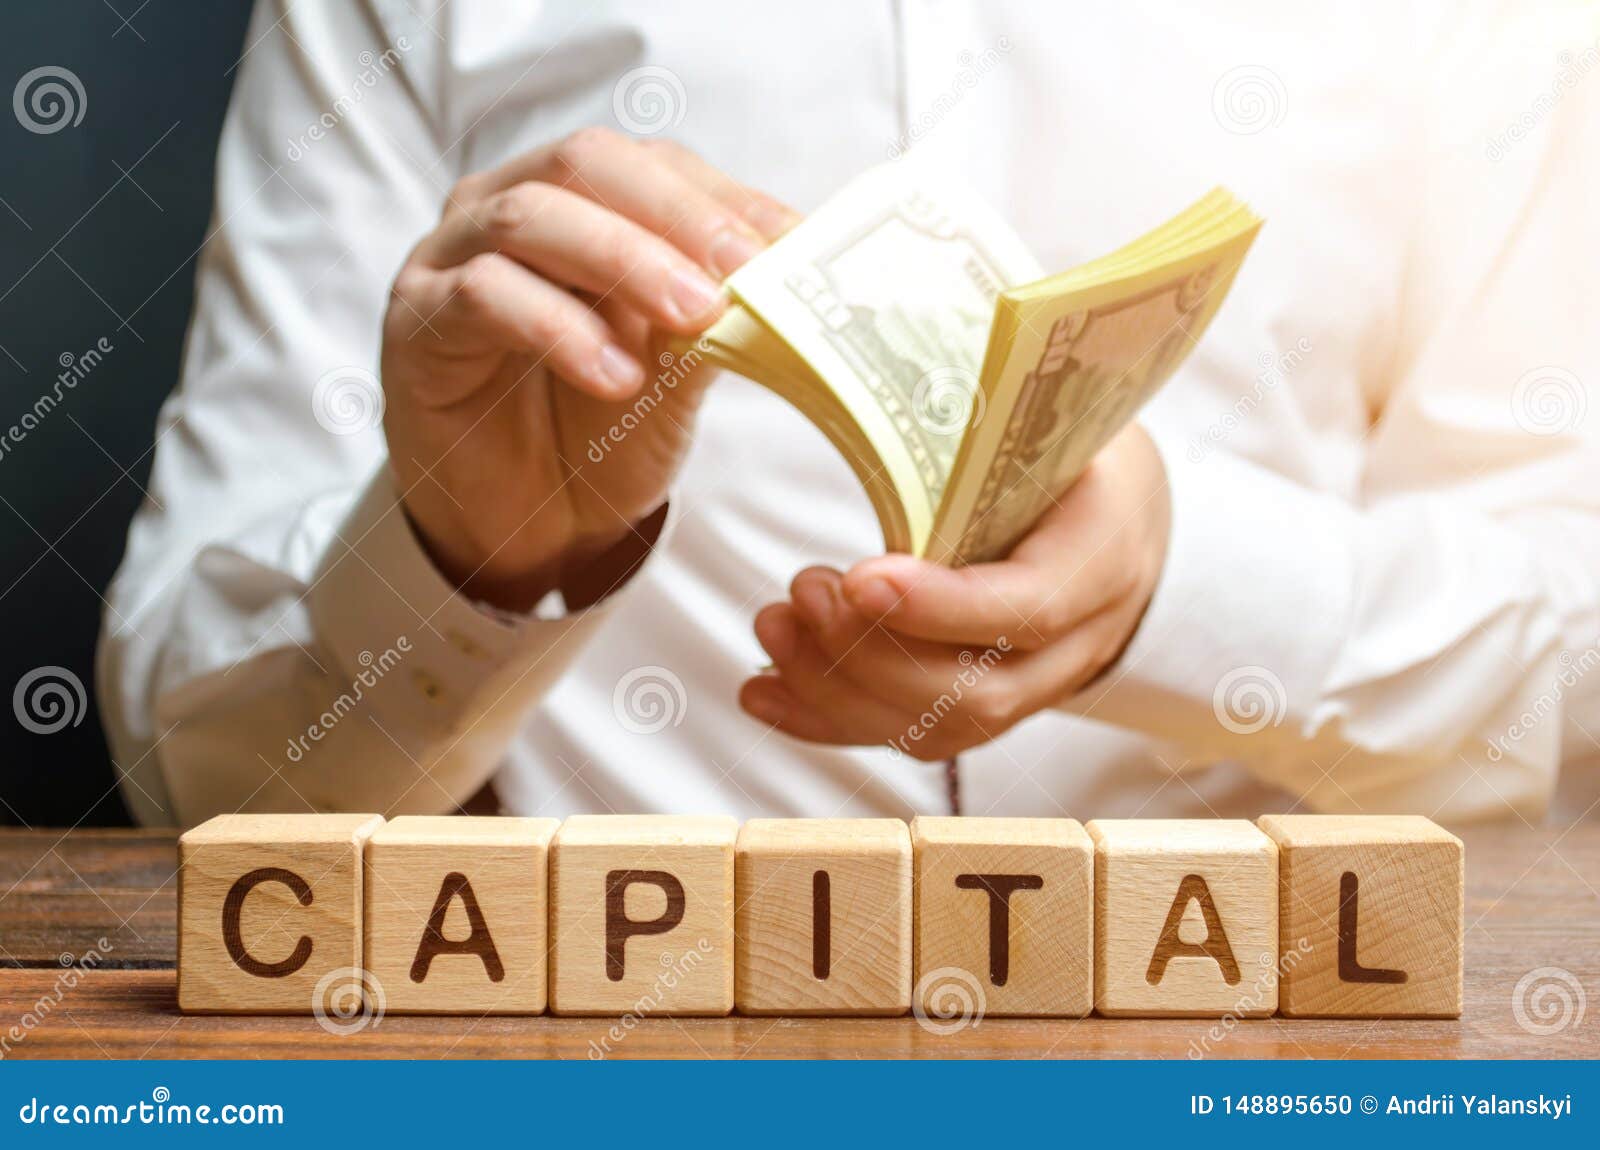 businessman counts money on the background of the caption capital. capitalism, capital increase and influence. financial